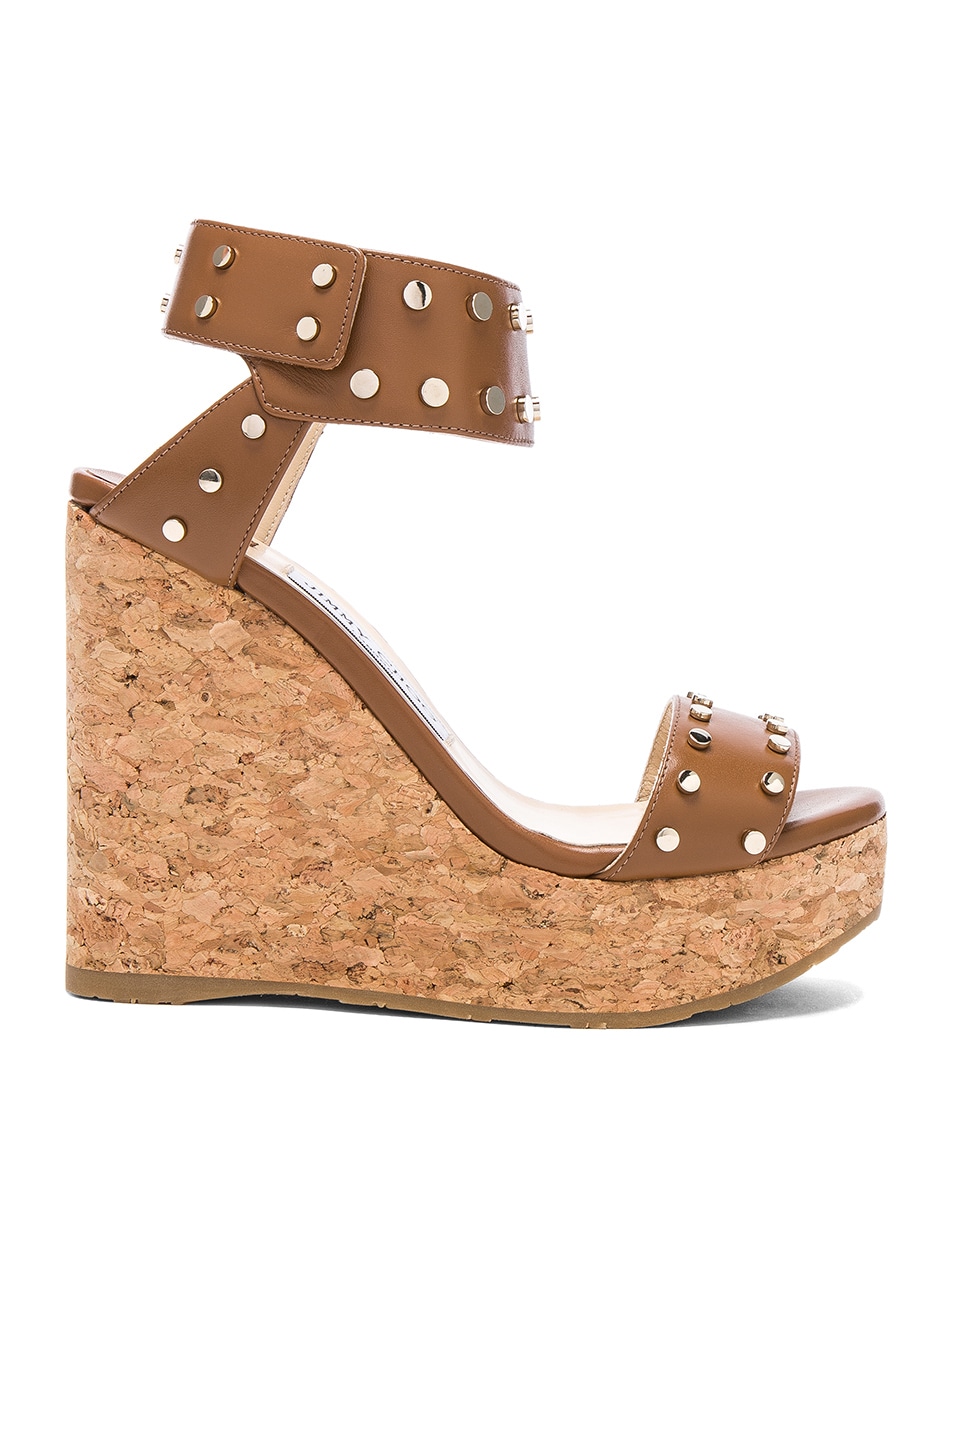 Image 1 of Jimmy Choo Nelly 120 Leather Wedges in Canyon & Gold